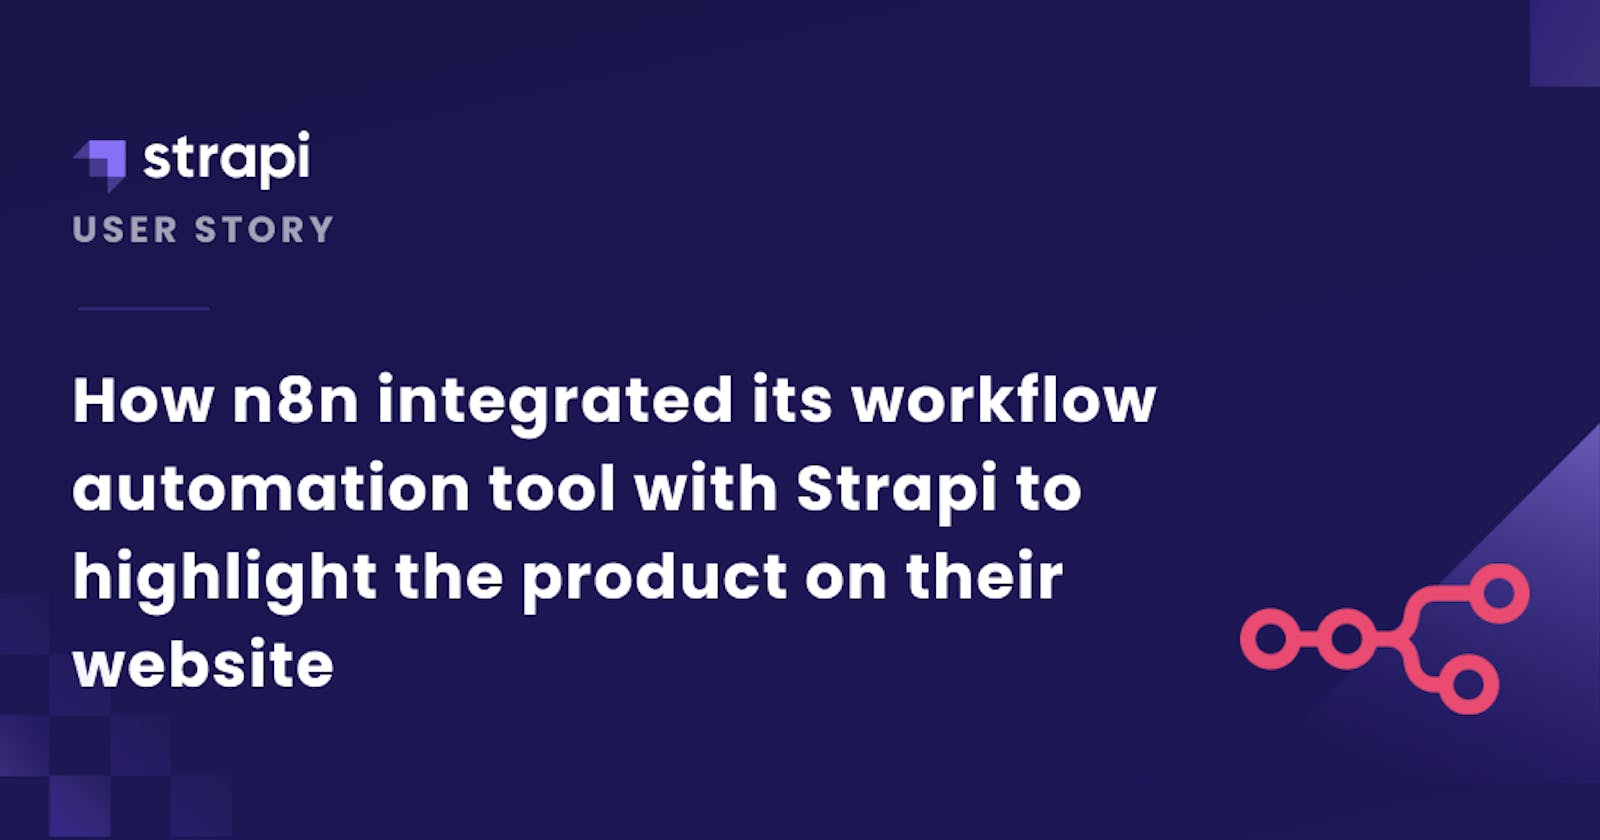 How n8n integrated its workflow automation tool with Strapi to highlight the product on their website